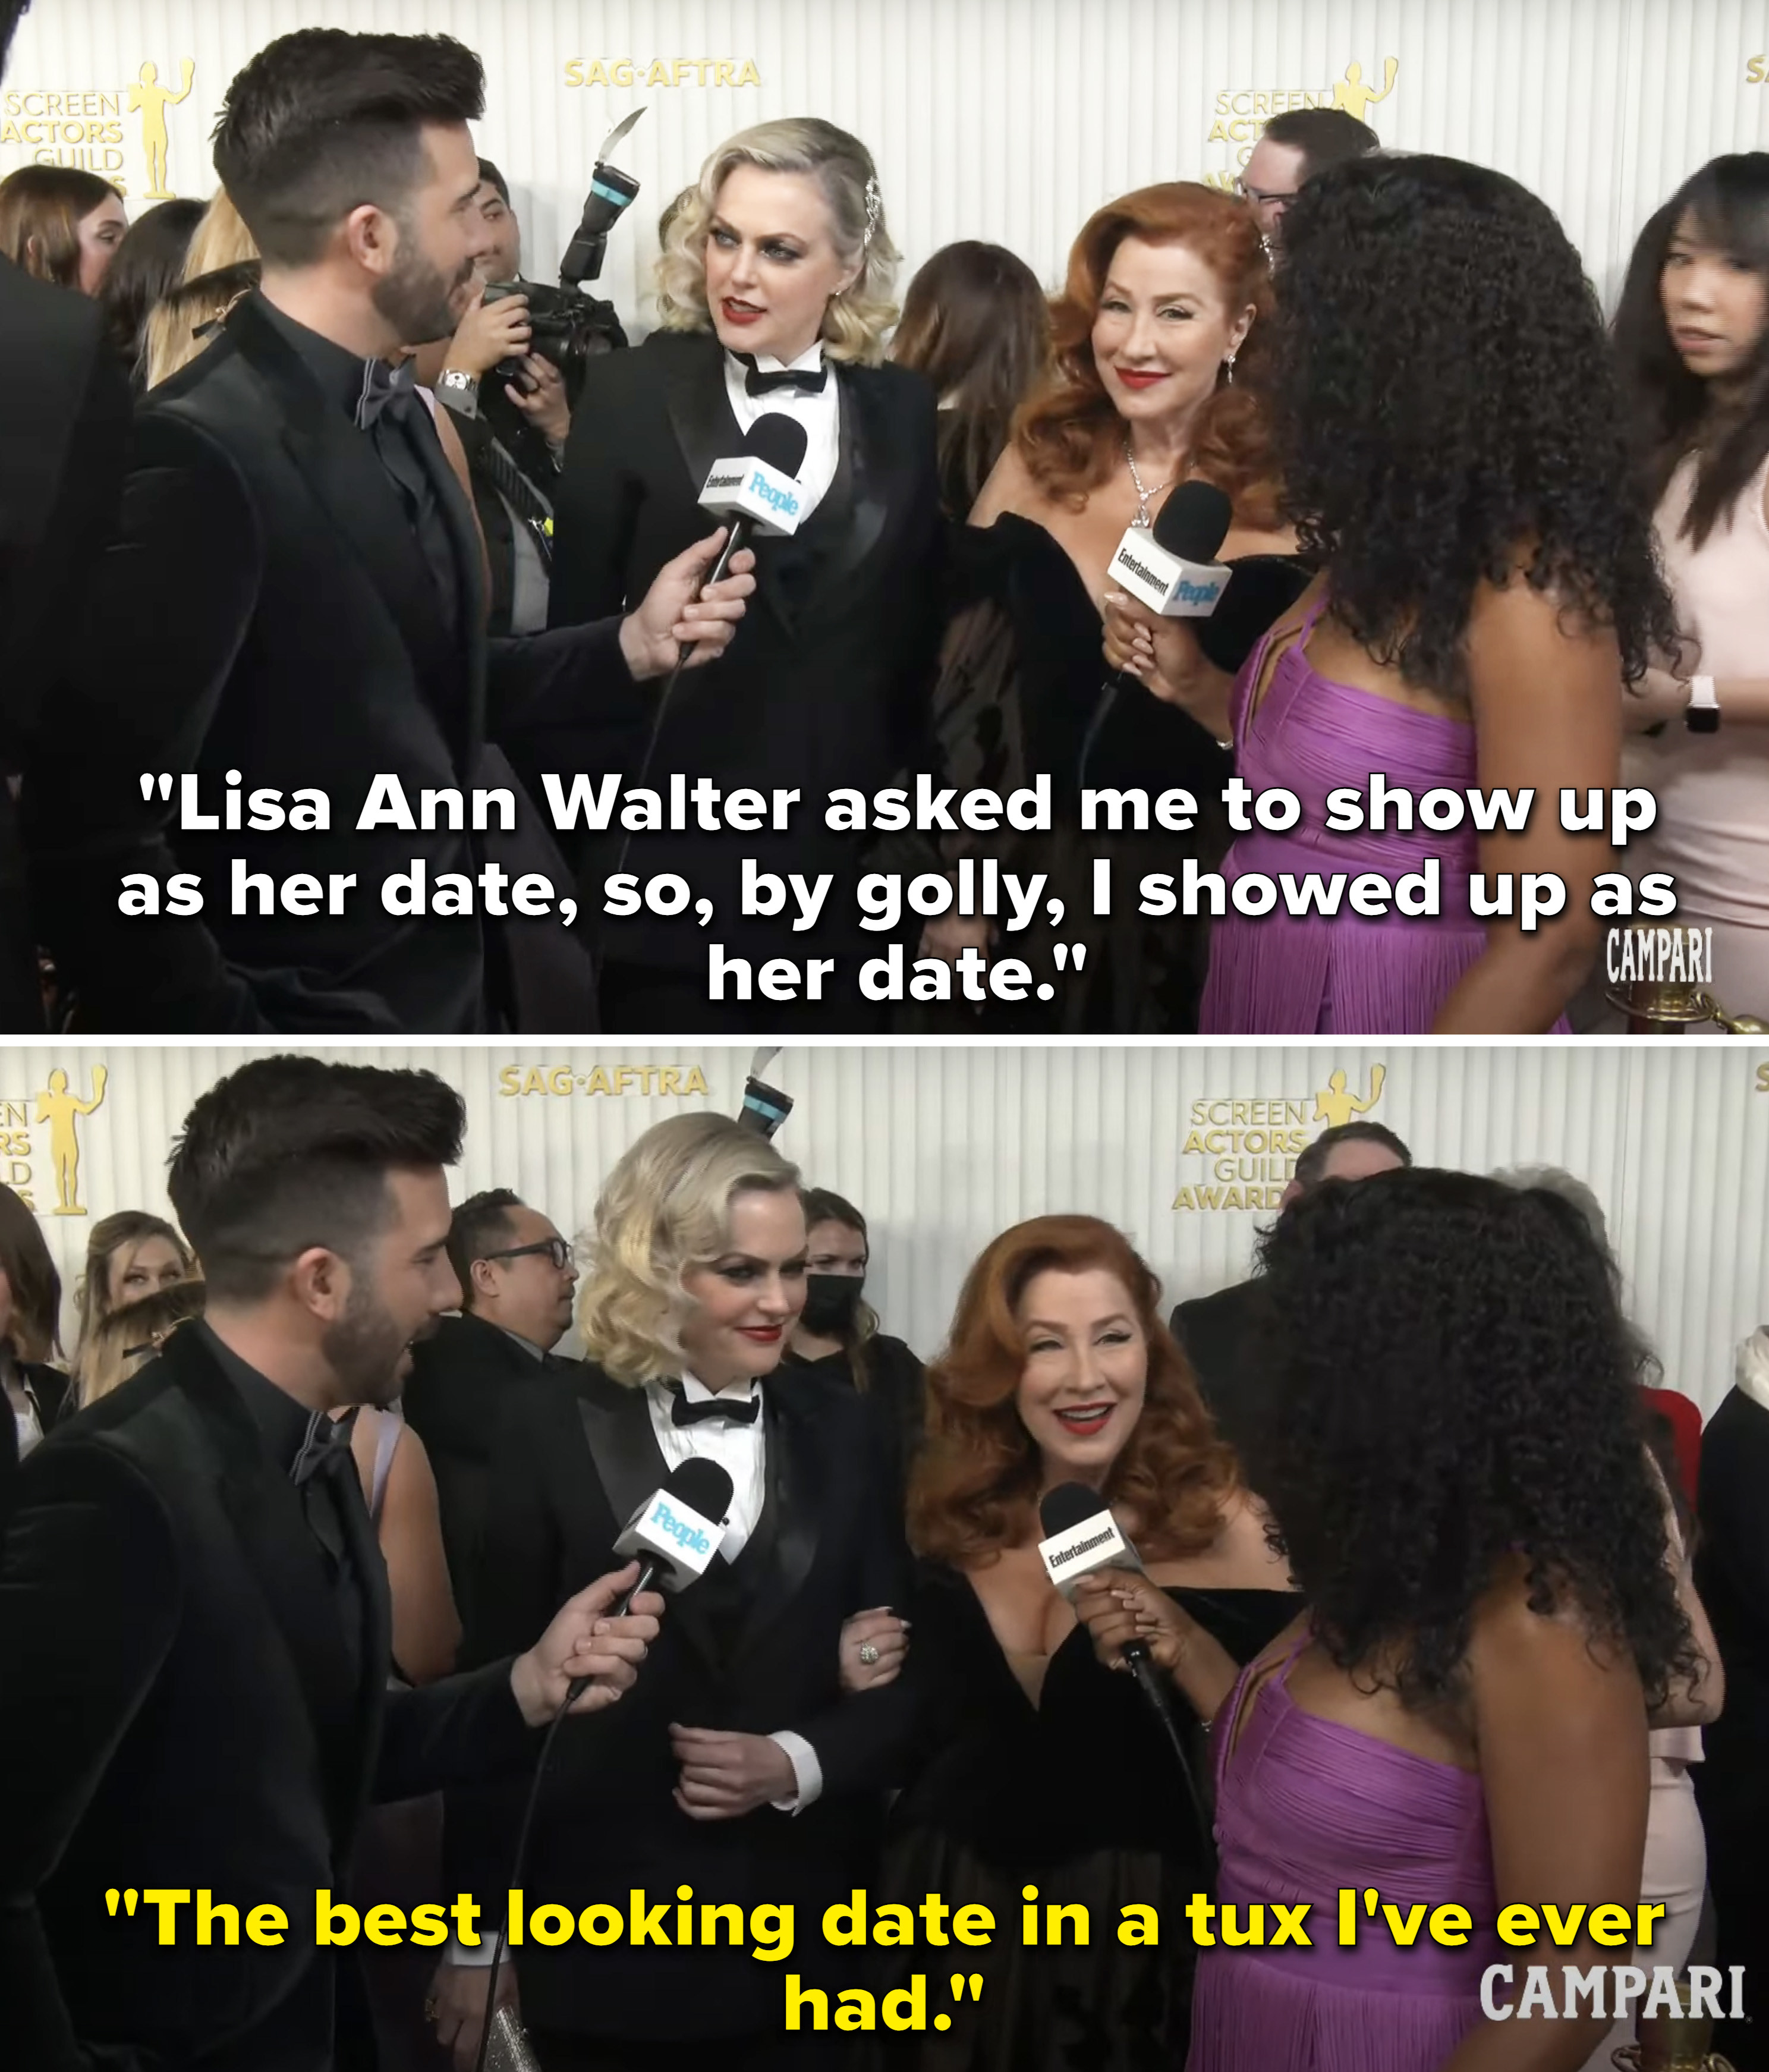 Elaine Hendrix and Lisa Ann Walter being interviewed on the red carpet